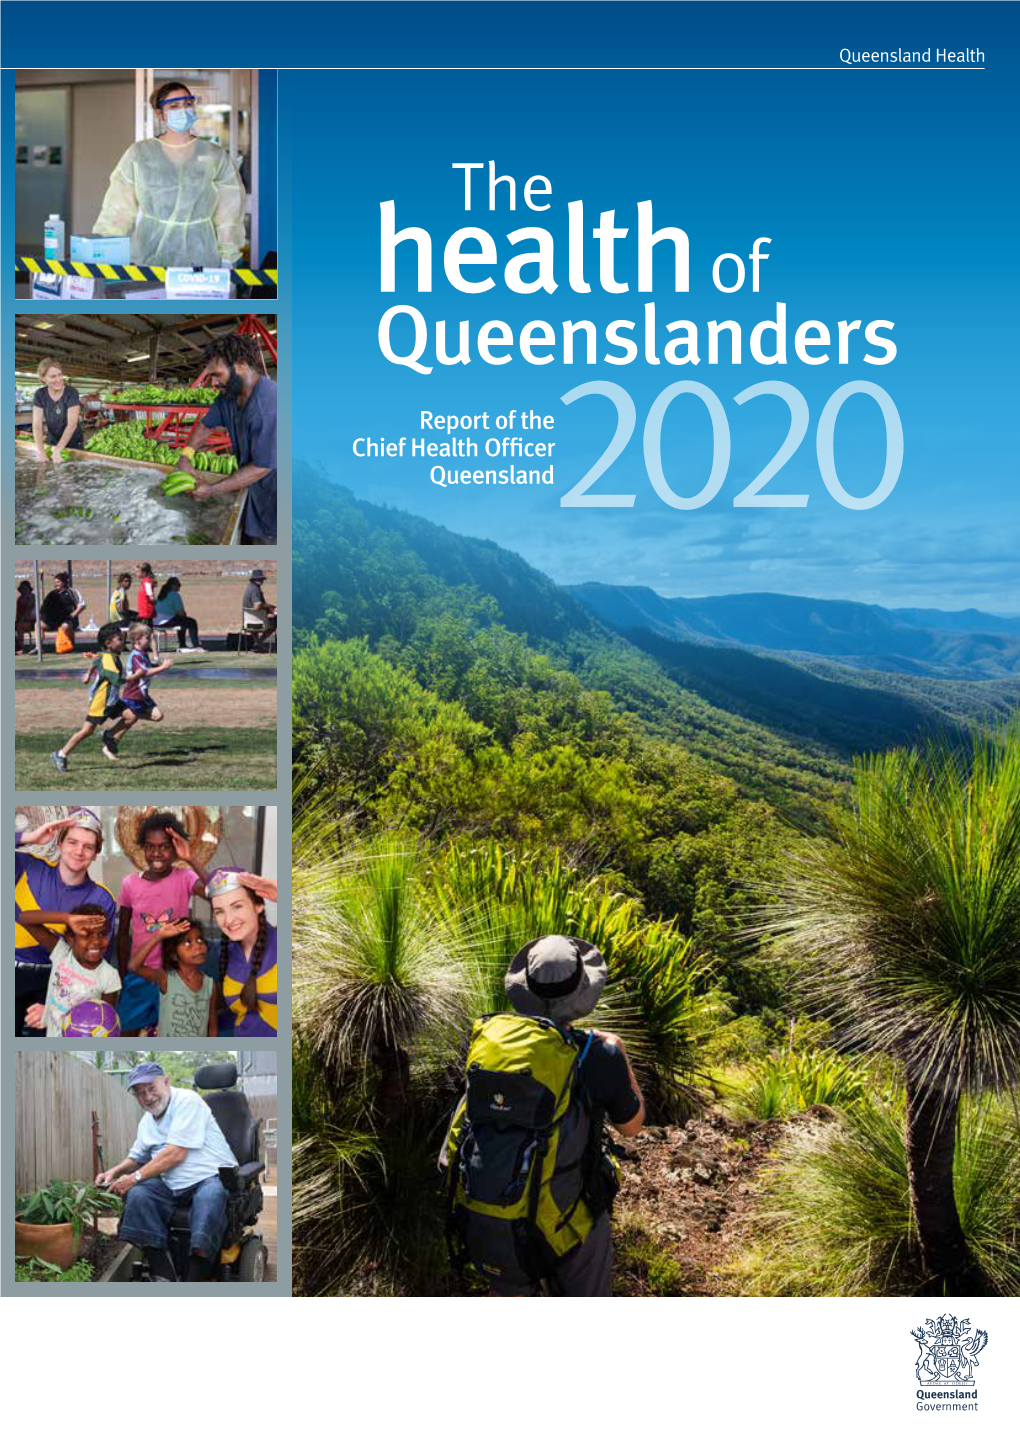 The Health of Queenslanders 2020 – Report of the Chief Health Officer